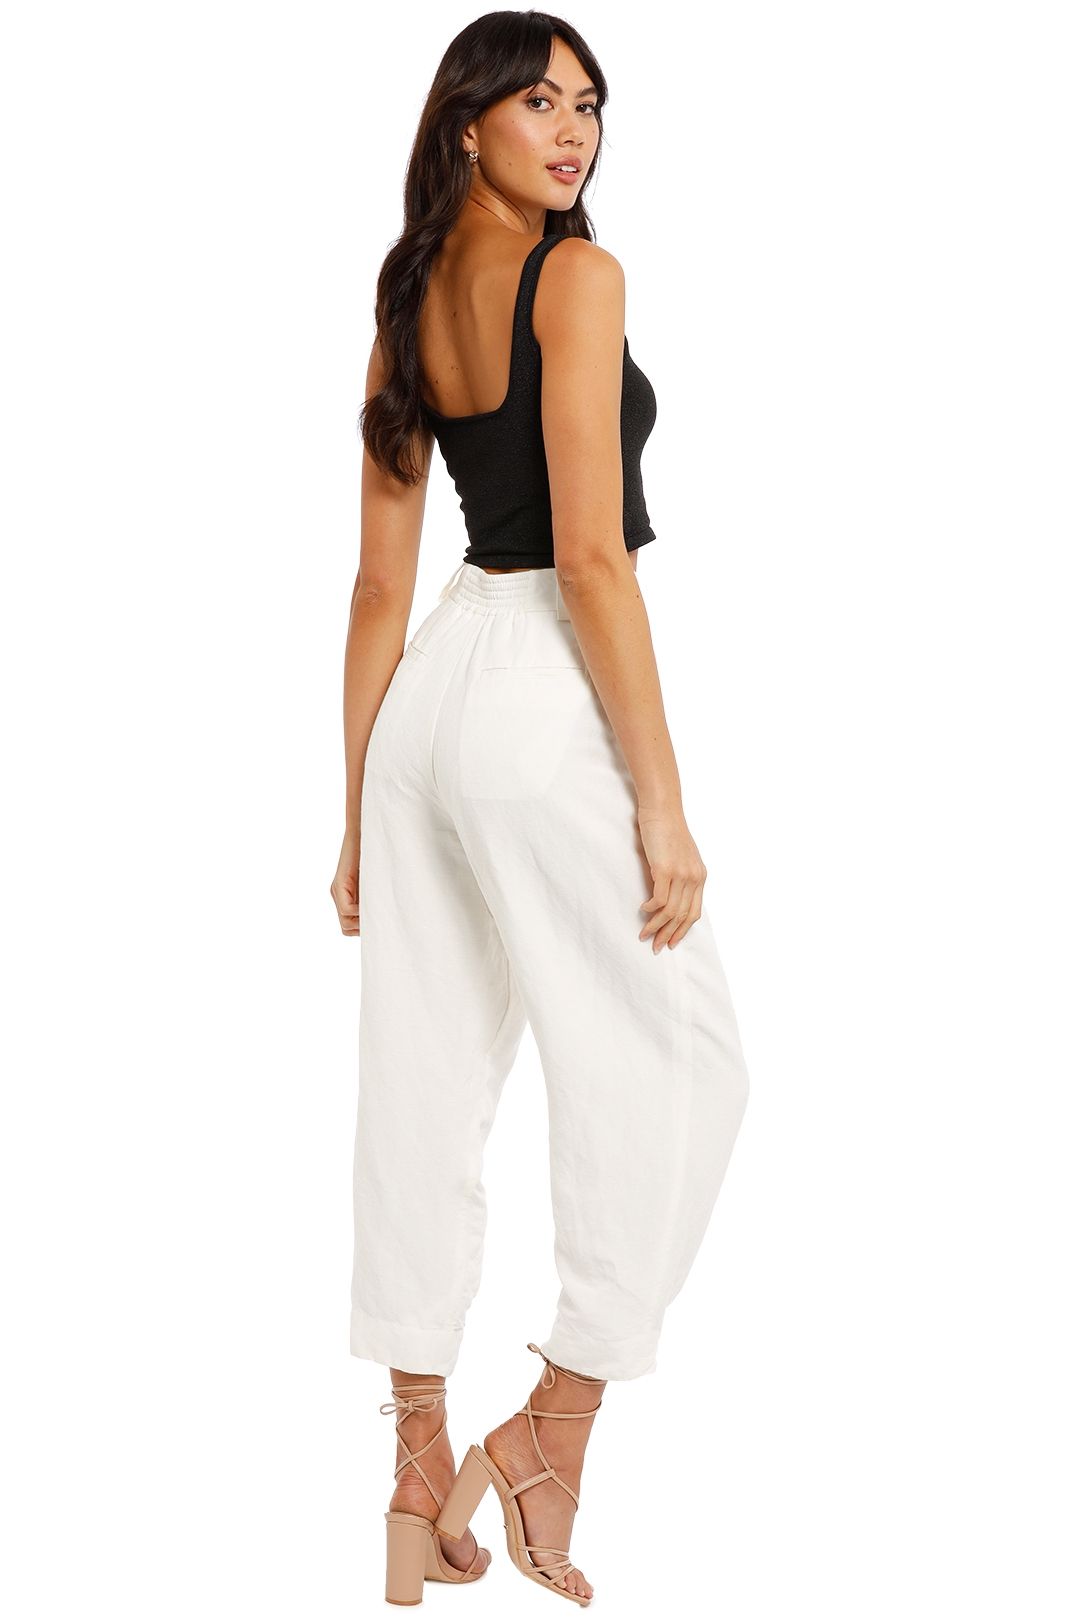 AJE Rarity White Tapered Pant cropped